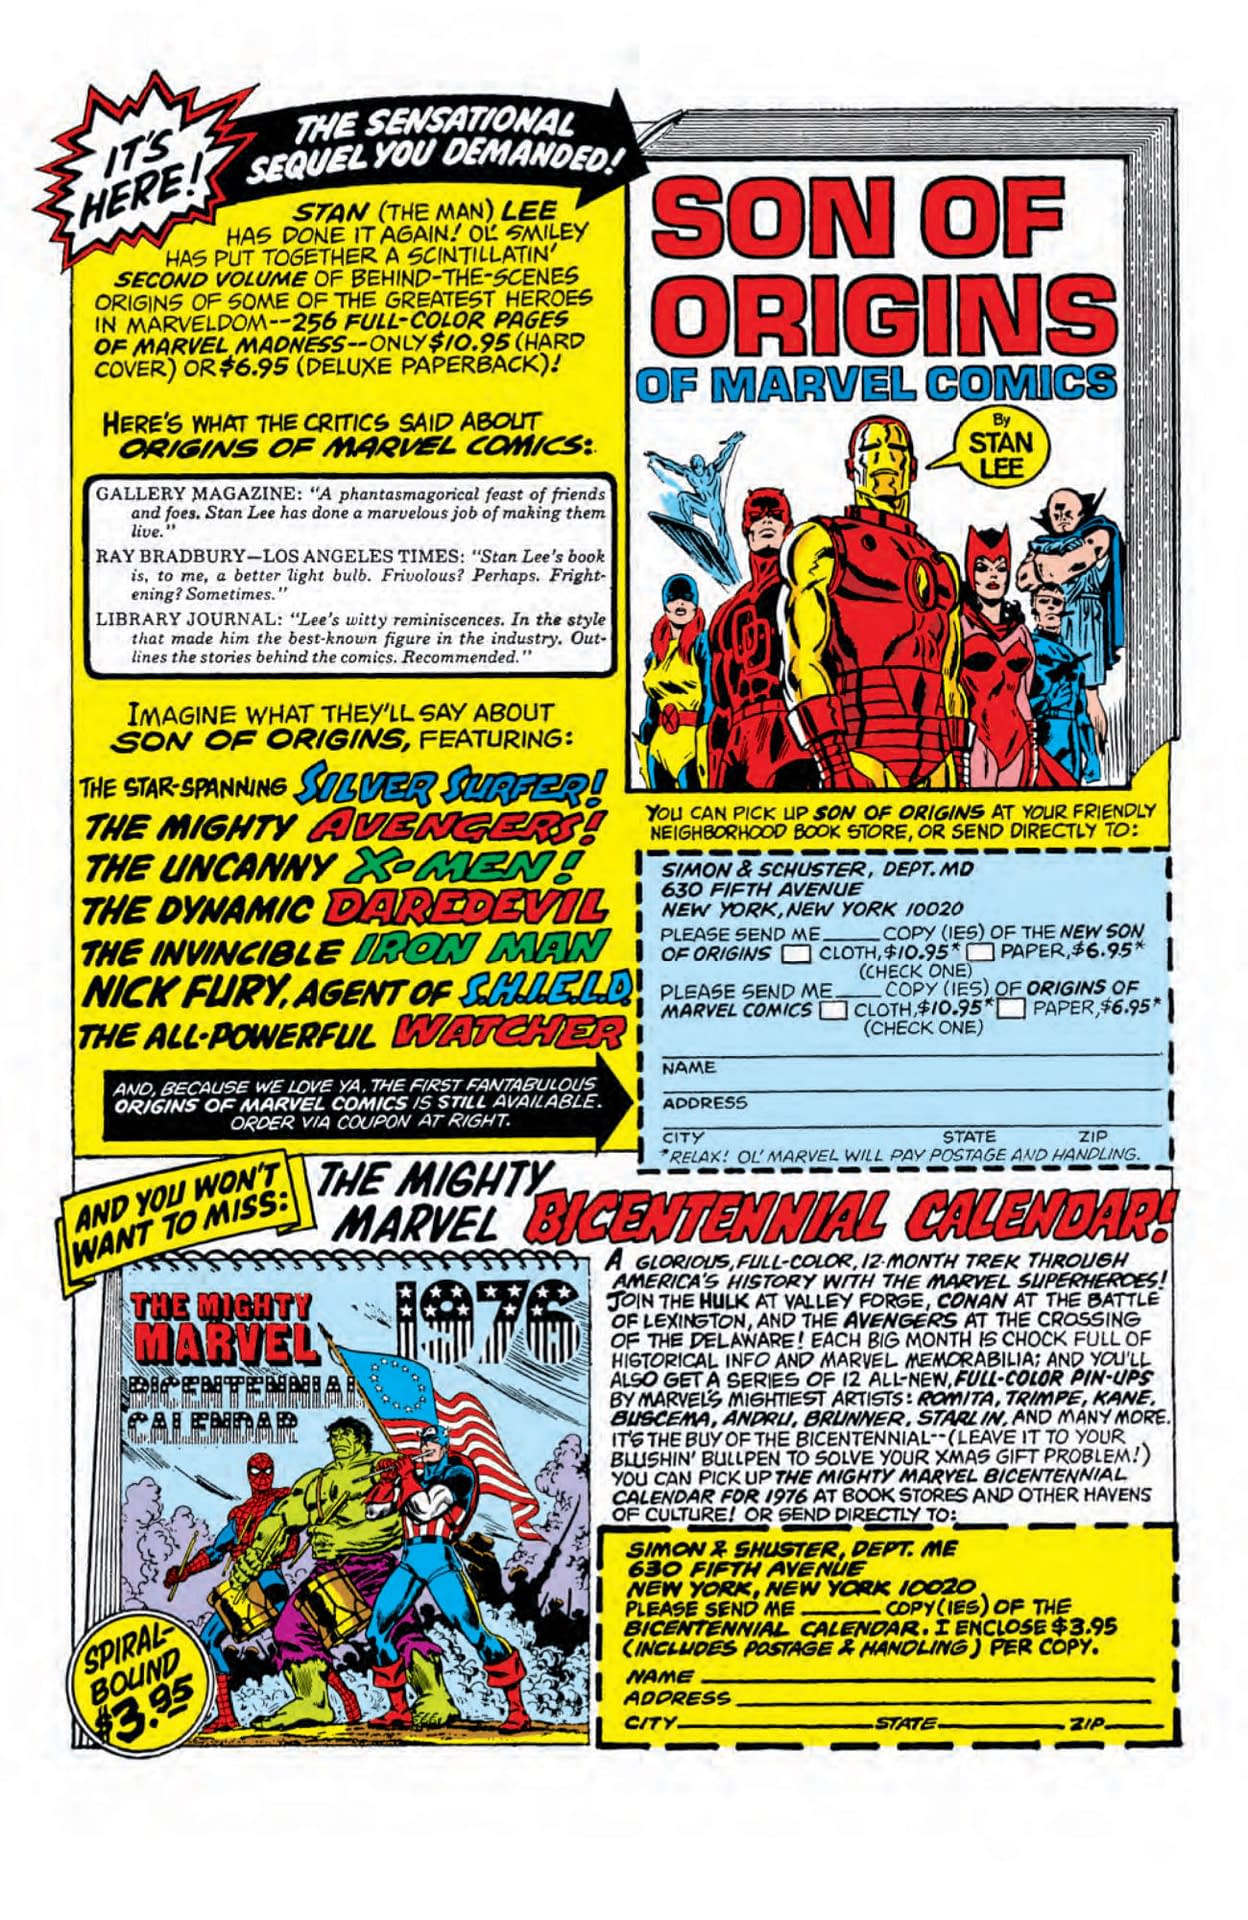 3 Classic Comic Book Ad Pages from the Howard the Duck #1 Facsimile Edition